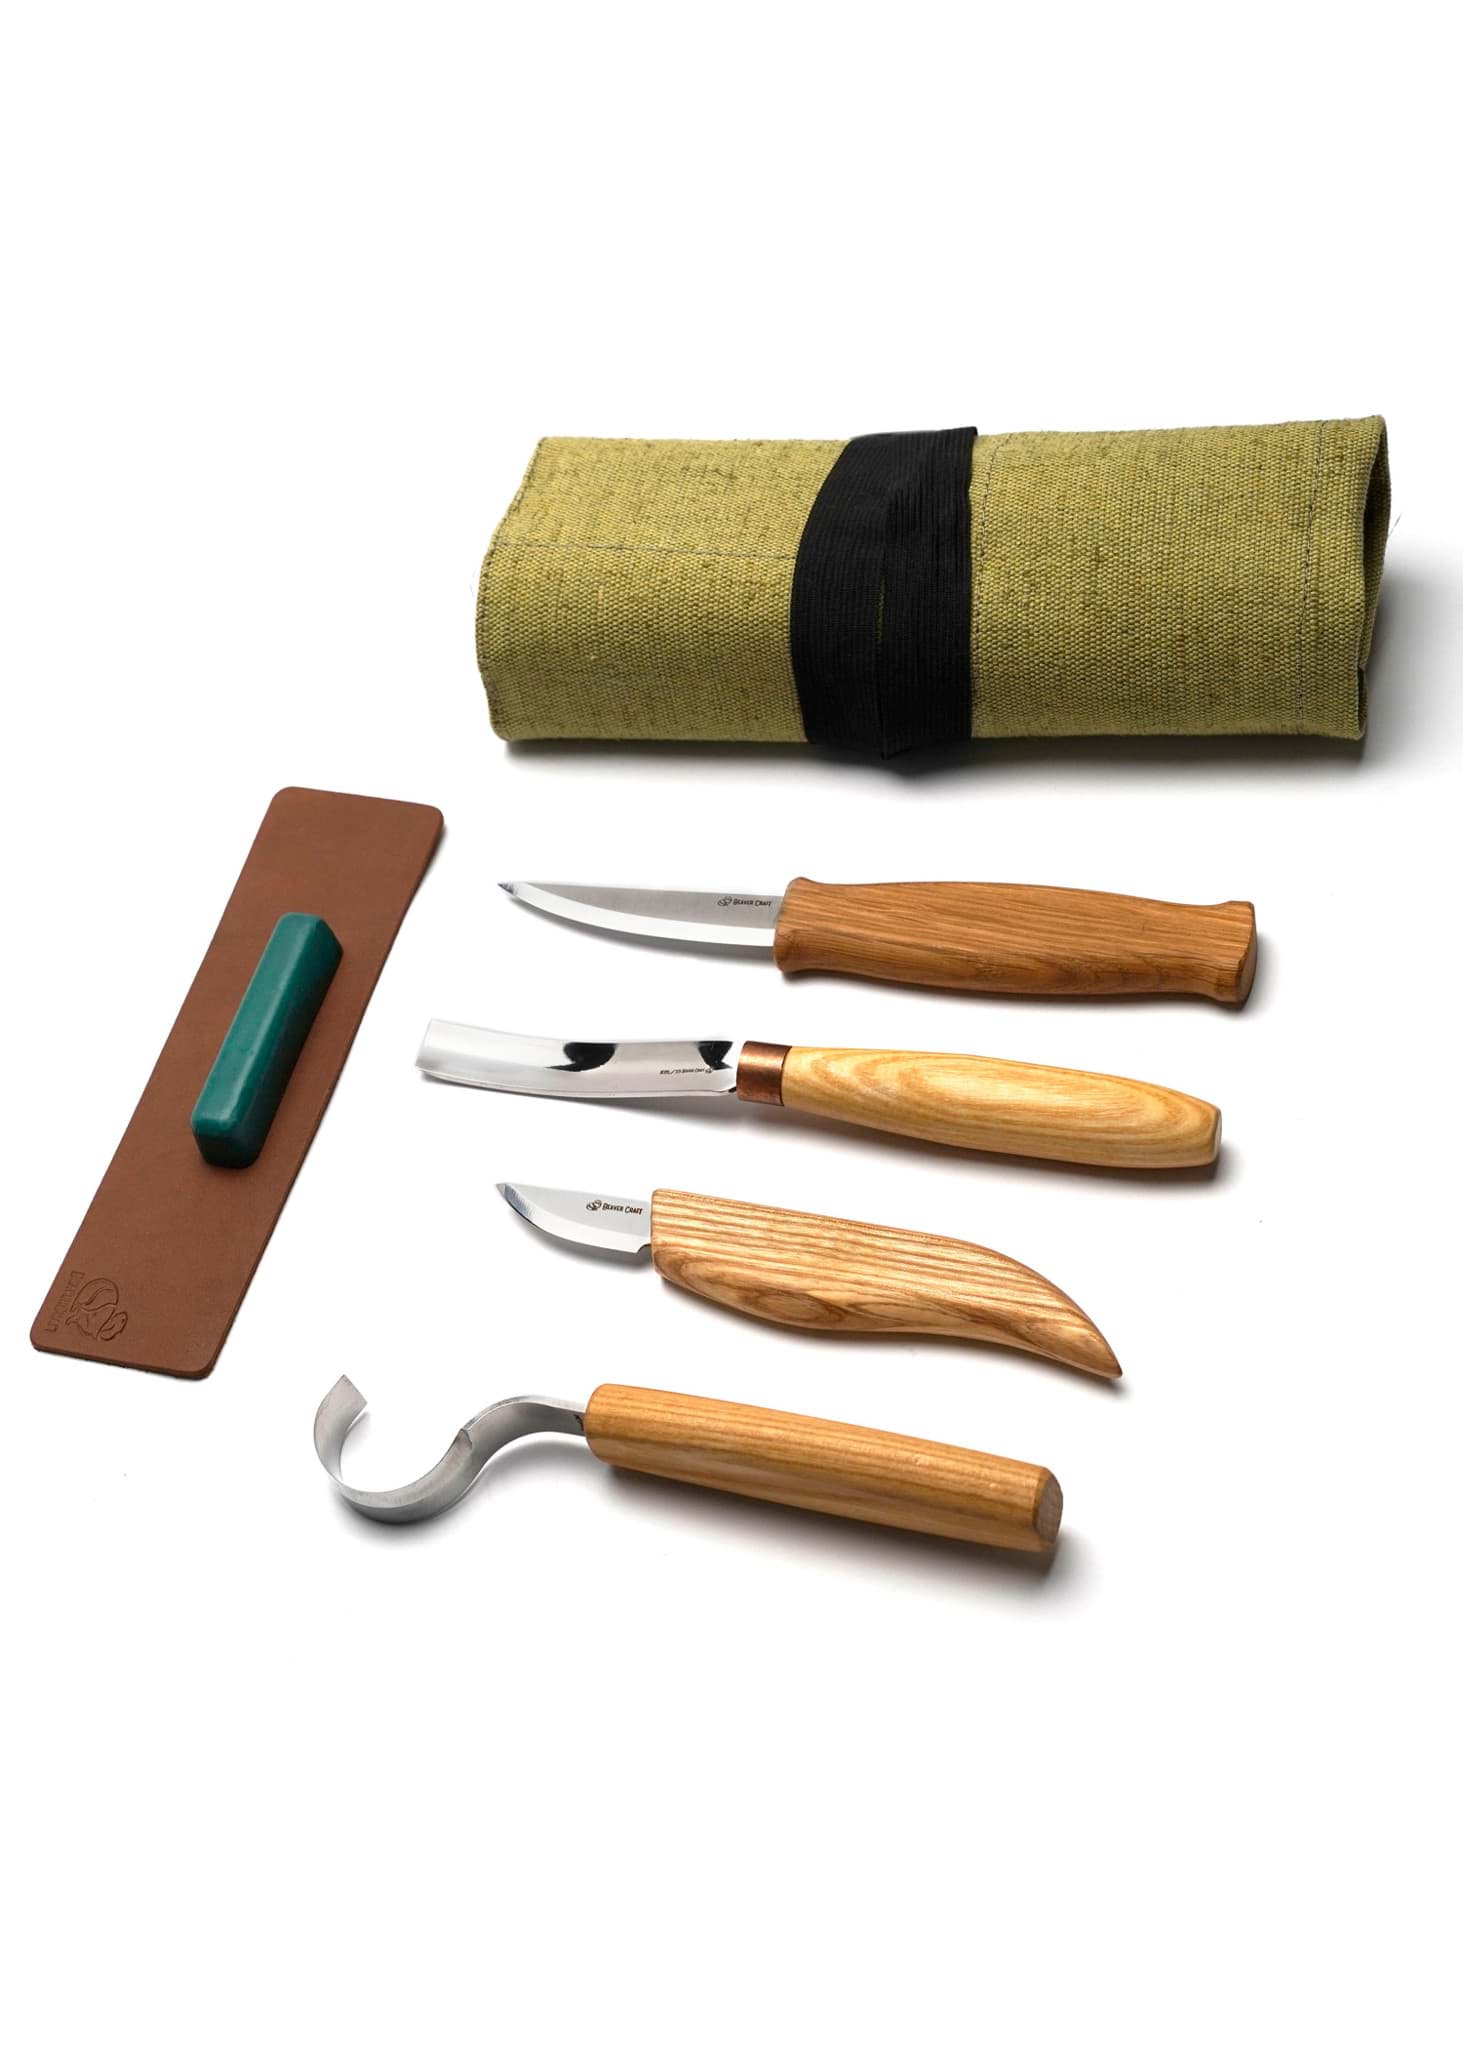 Picture of BeaverCraft - Professional Carving Set for Spoons and Kuksa 4-Piece with Accessories